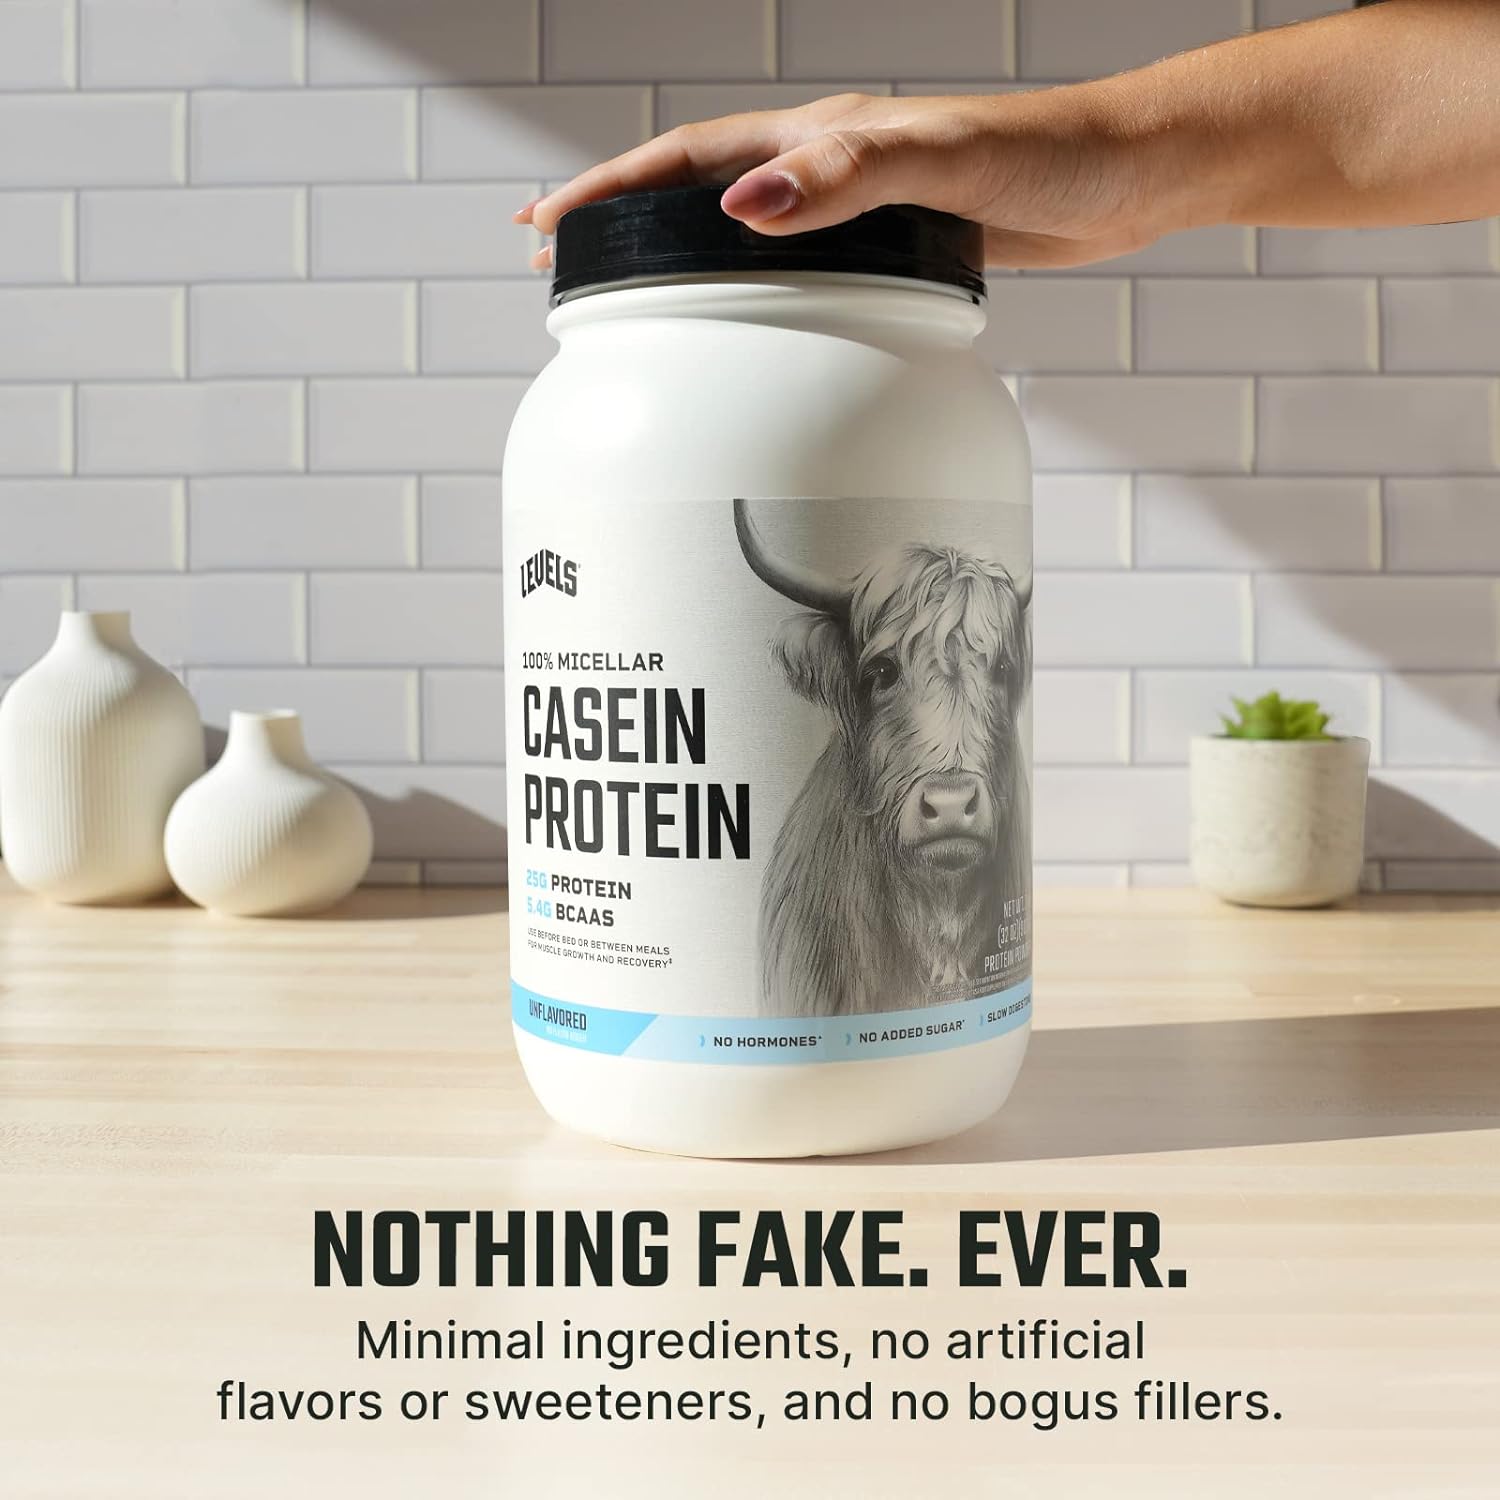 Levels 100% Micellar Casein Protein, Hormone Free, Unflavored 2LB : Health & Household